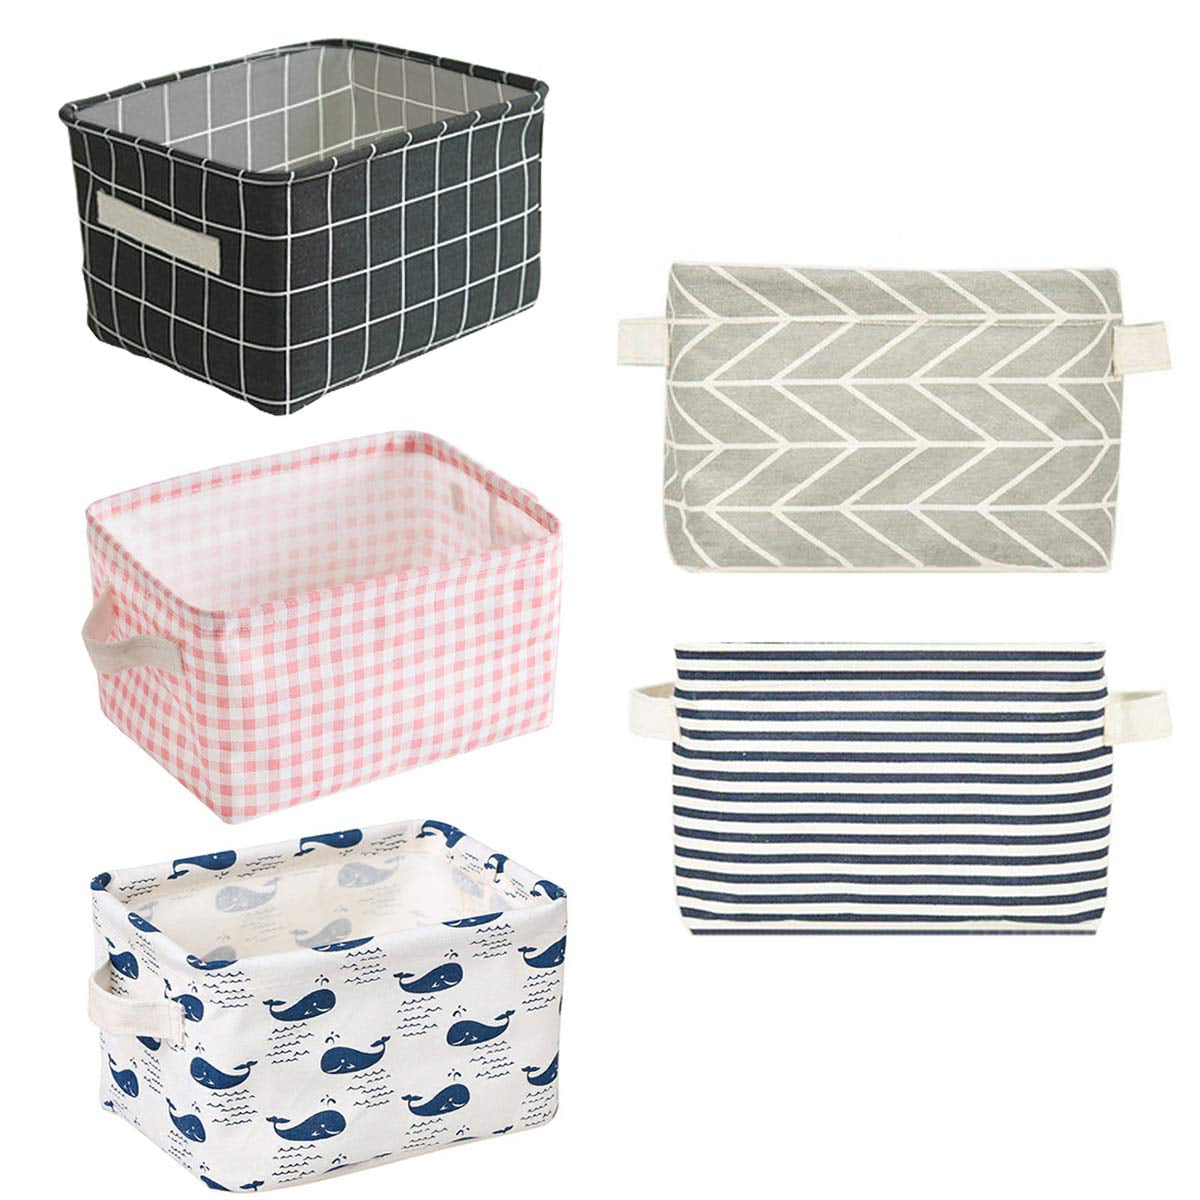 5 Pcs Foldable Storage Bin Basket,Foldable Fabric Storage Receive Basket with Handle Cotton Linen Blend Storage Bins for Makeup Book Baby Toy,8x6x5.5 inch 